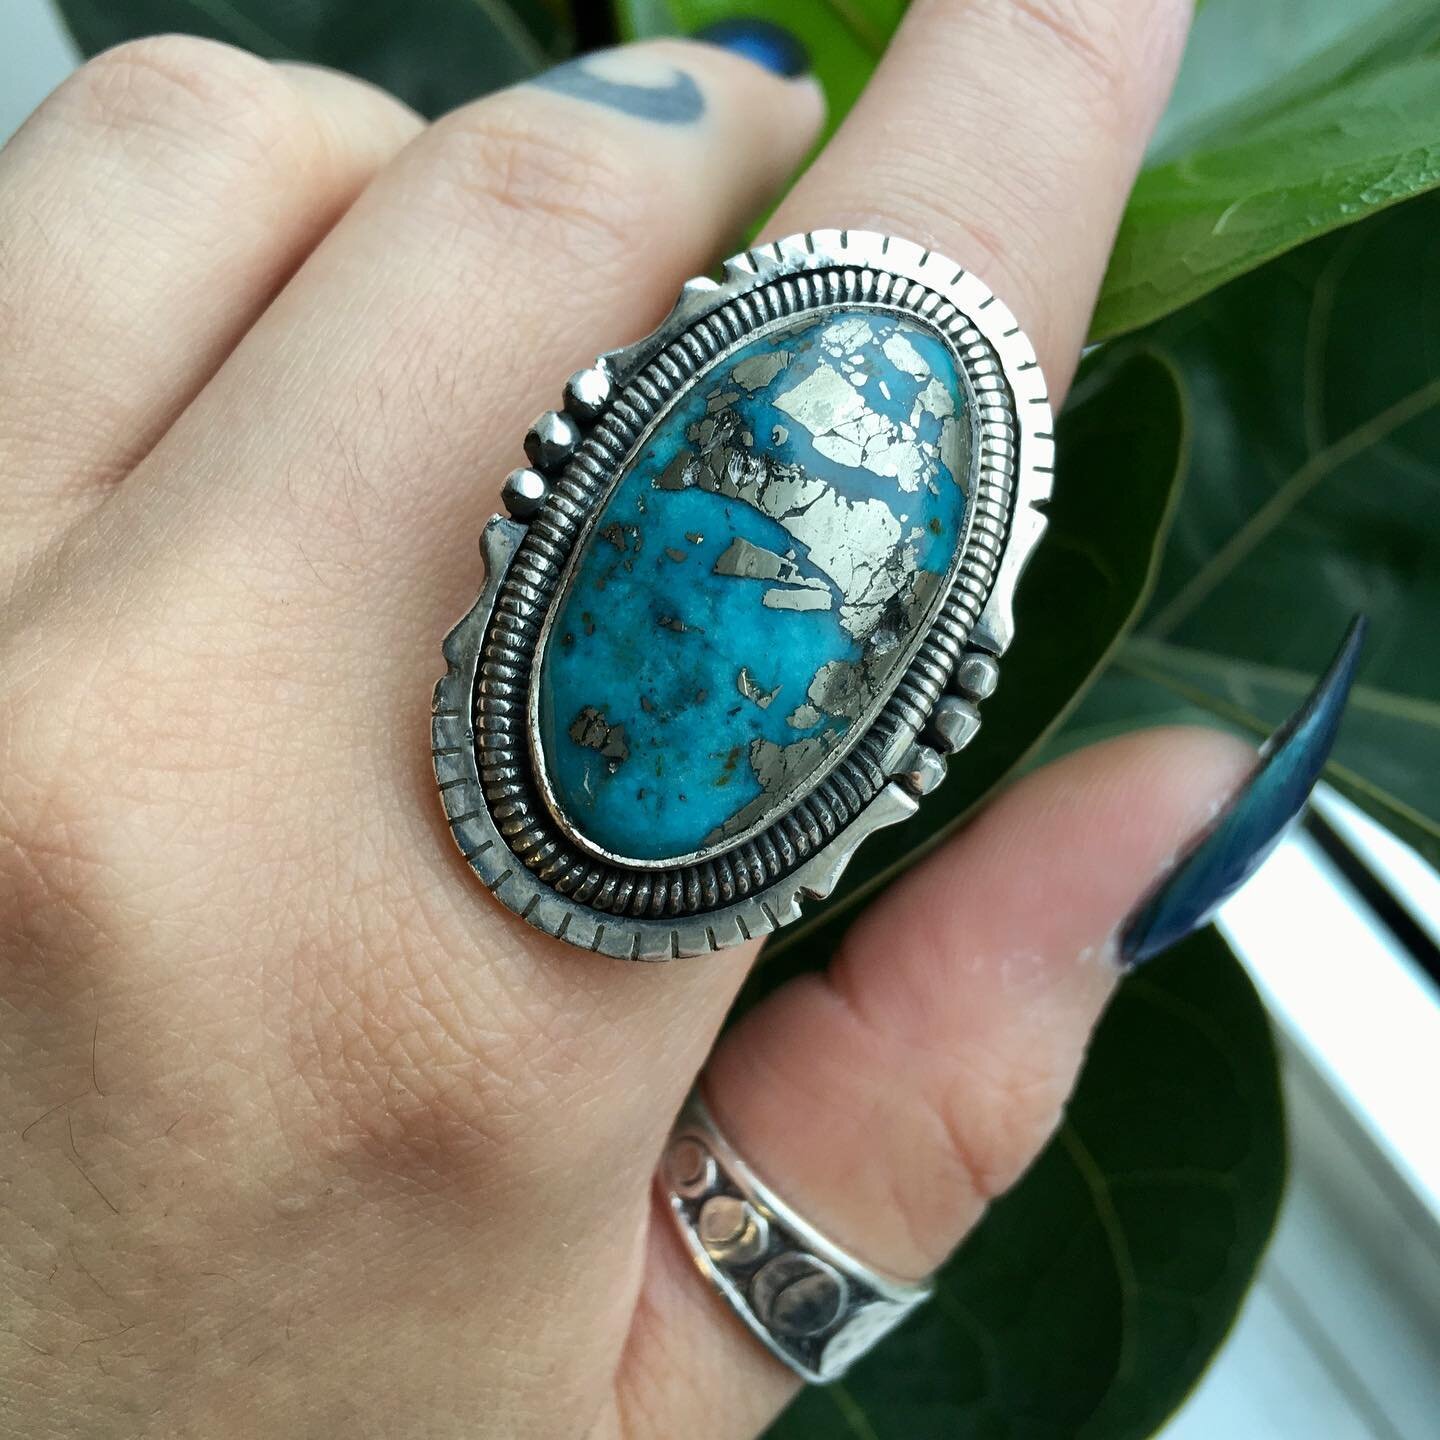 💙 Persian Turquoise 💙

This stunning variety of turquoise often includes pyrite markings throughout, like this one!

This is most definitely a statement ring if we ever did see one! We could gaze into the vibrant Caribbean blue for hours 🌀

Commen